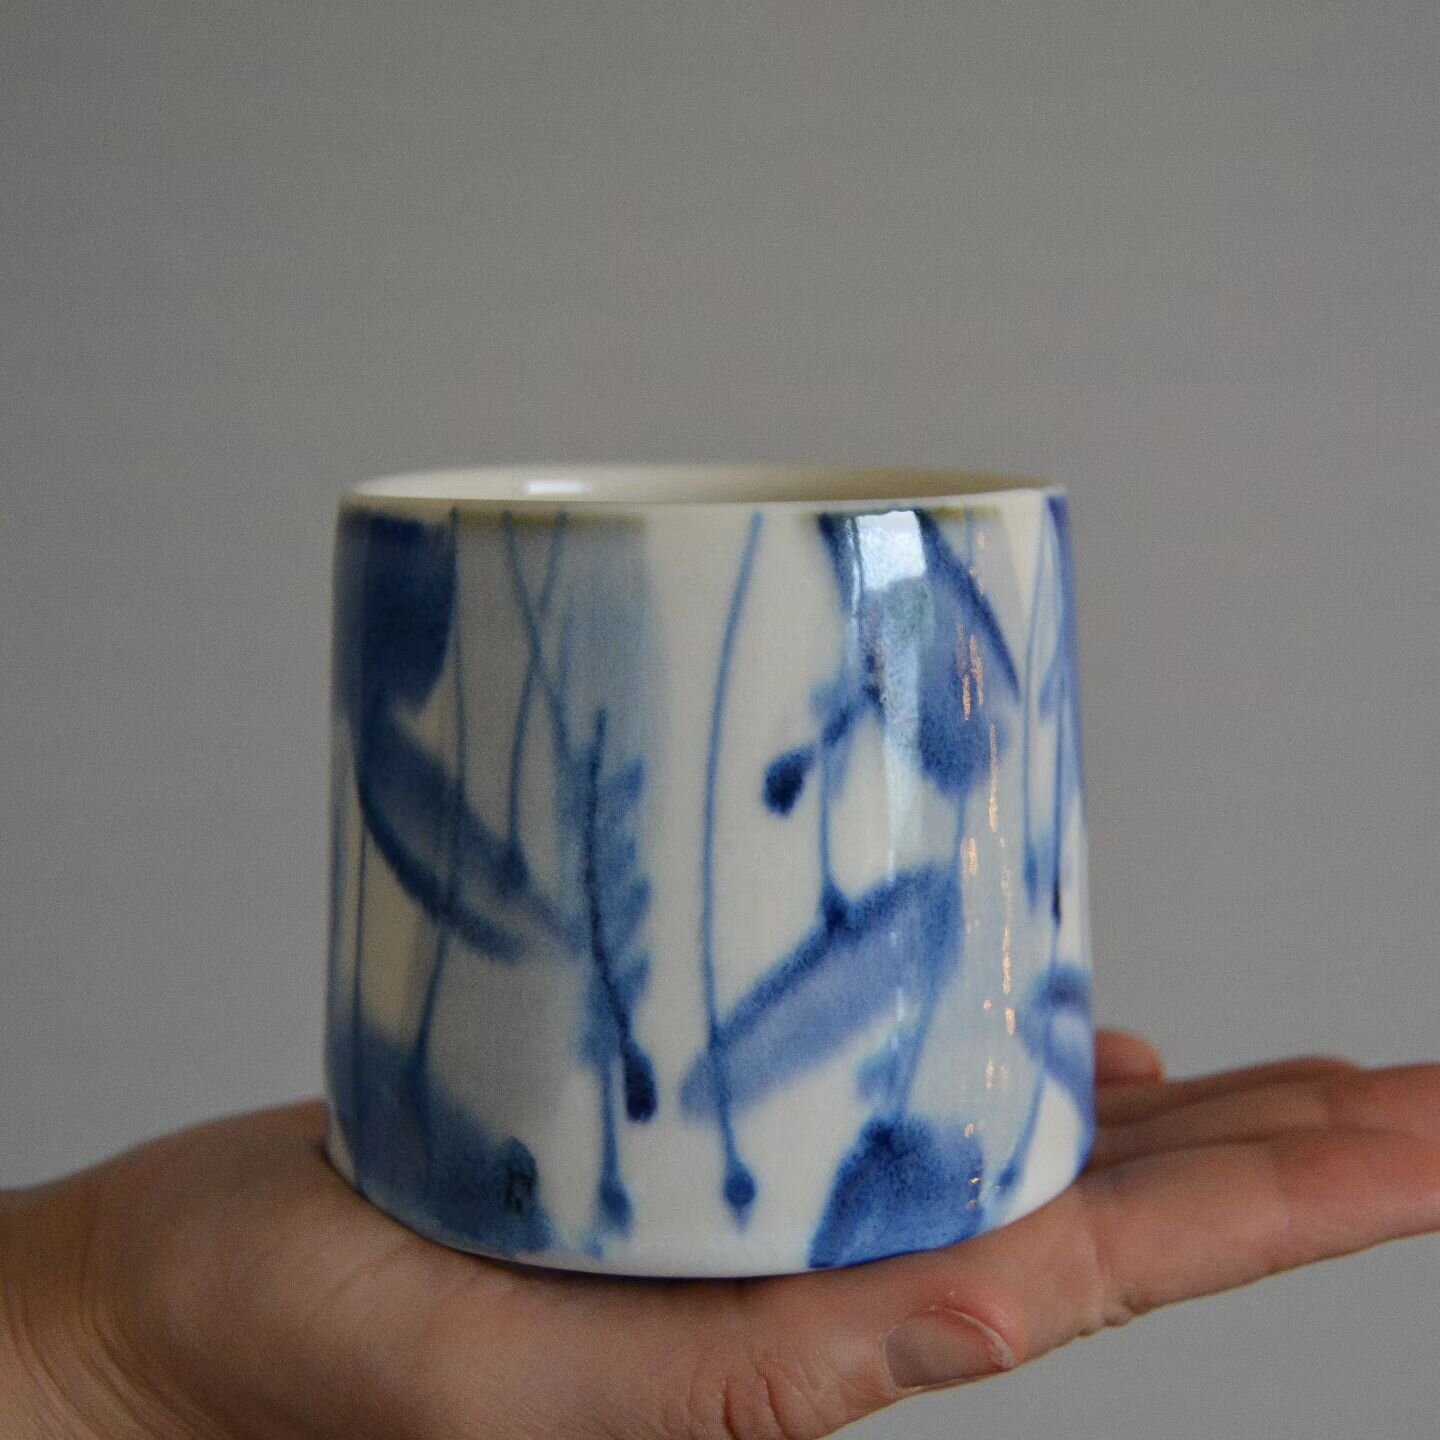 Hi folks! Hope you've all had a good day. Here is another, more bespoke porcelain pot. Love how the decoration bleeds with the glaze to make it look out of focus.